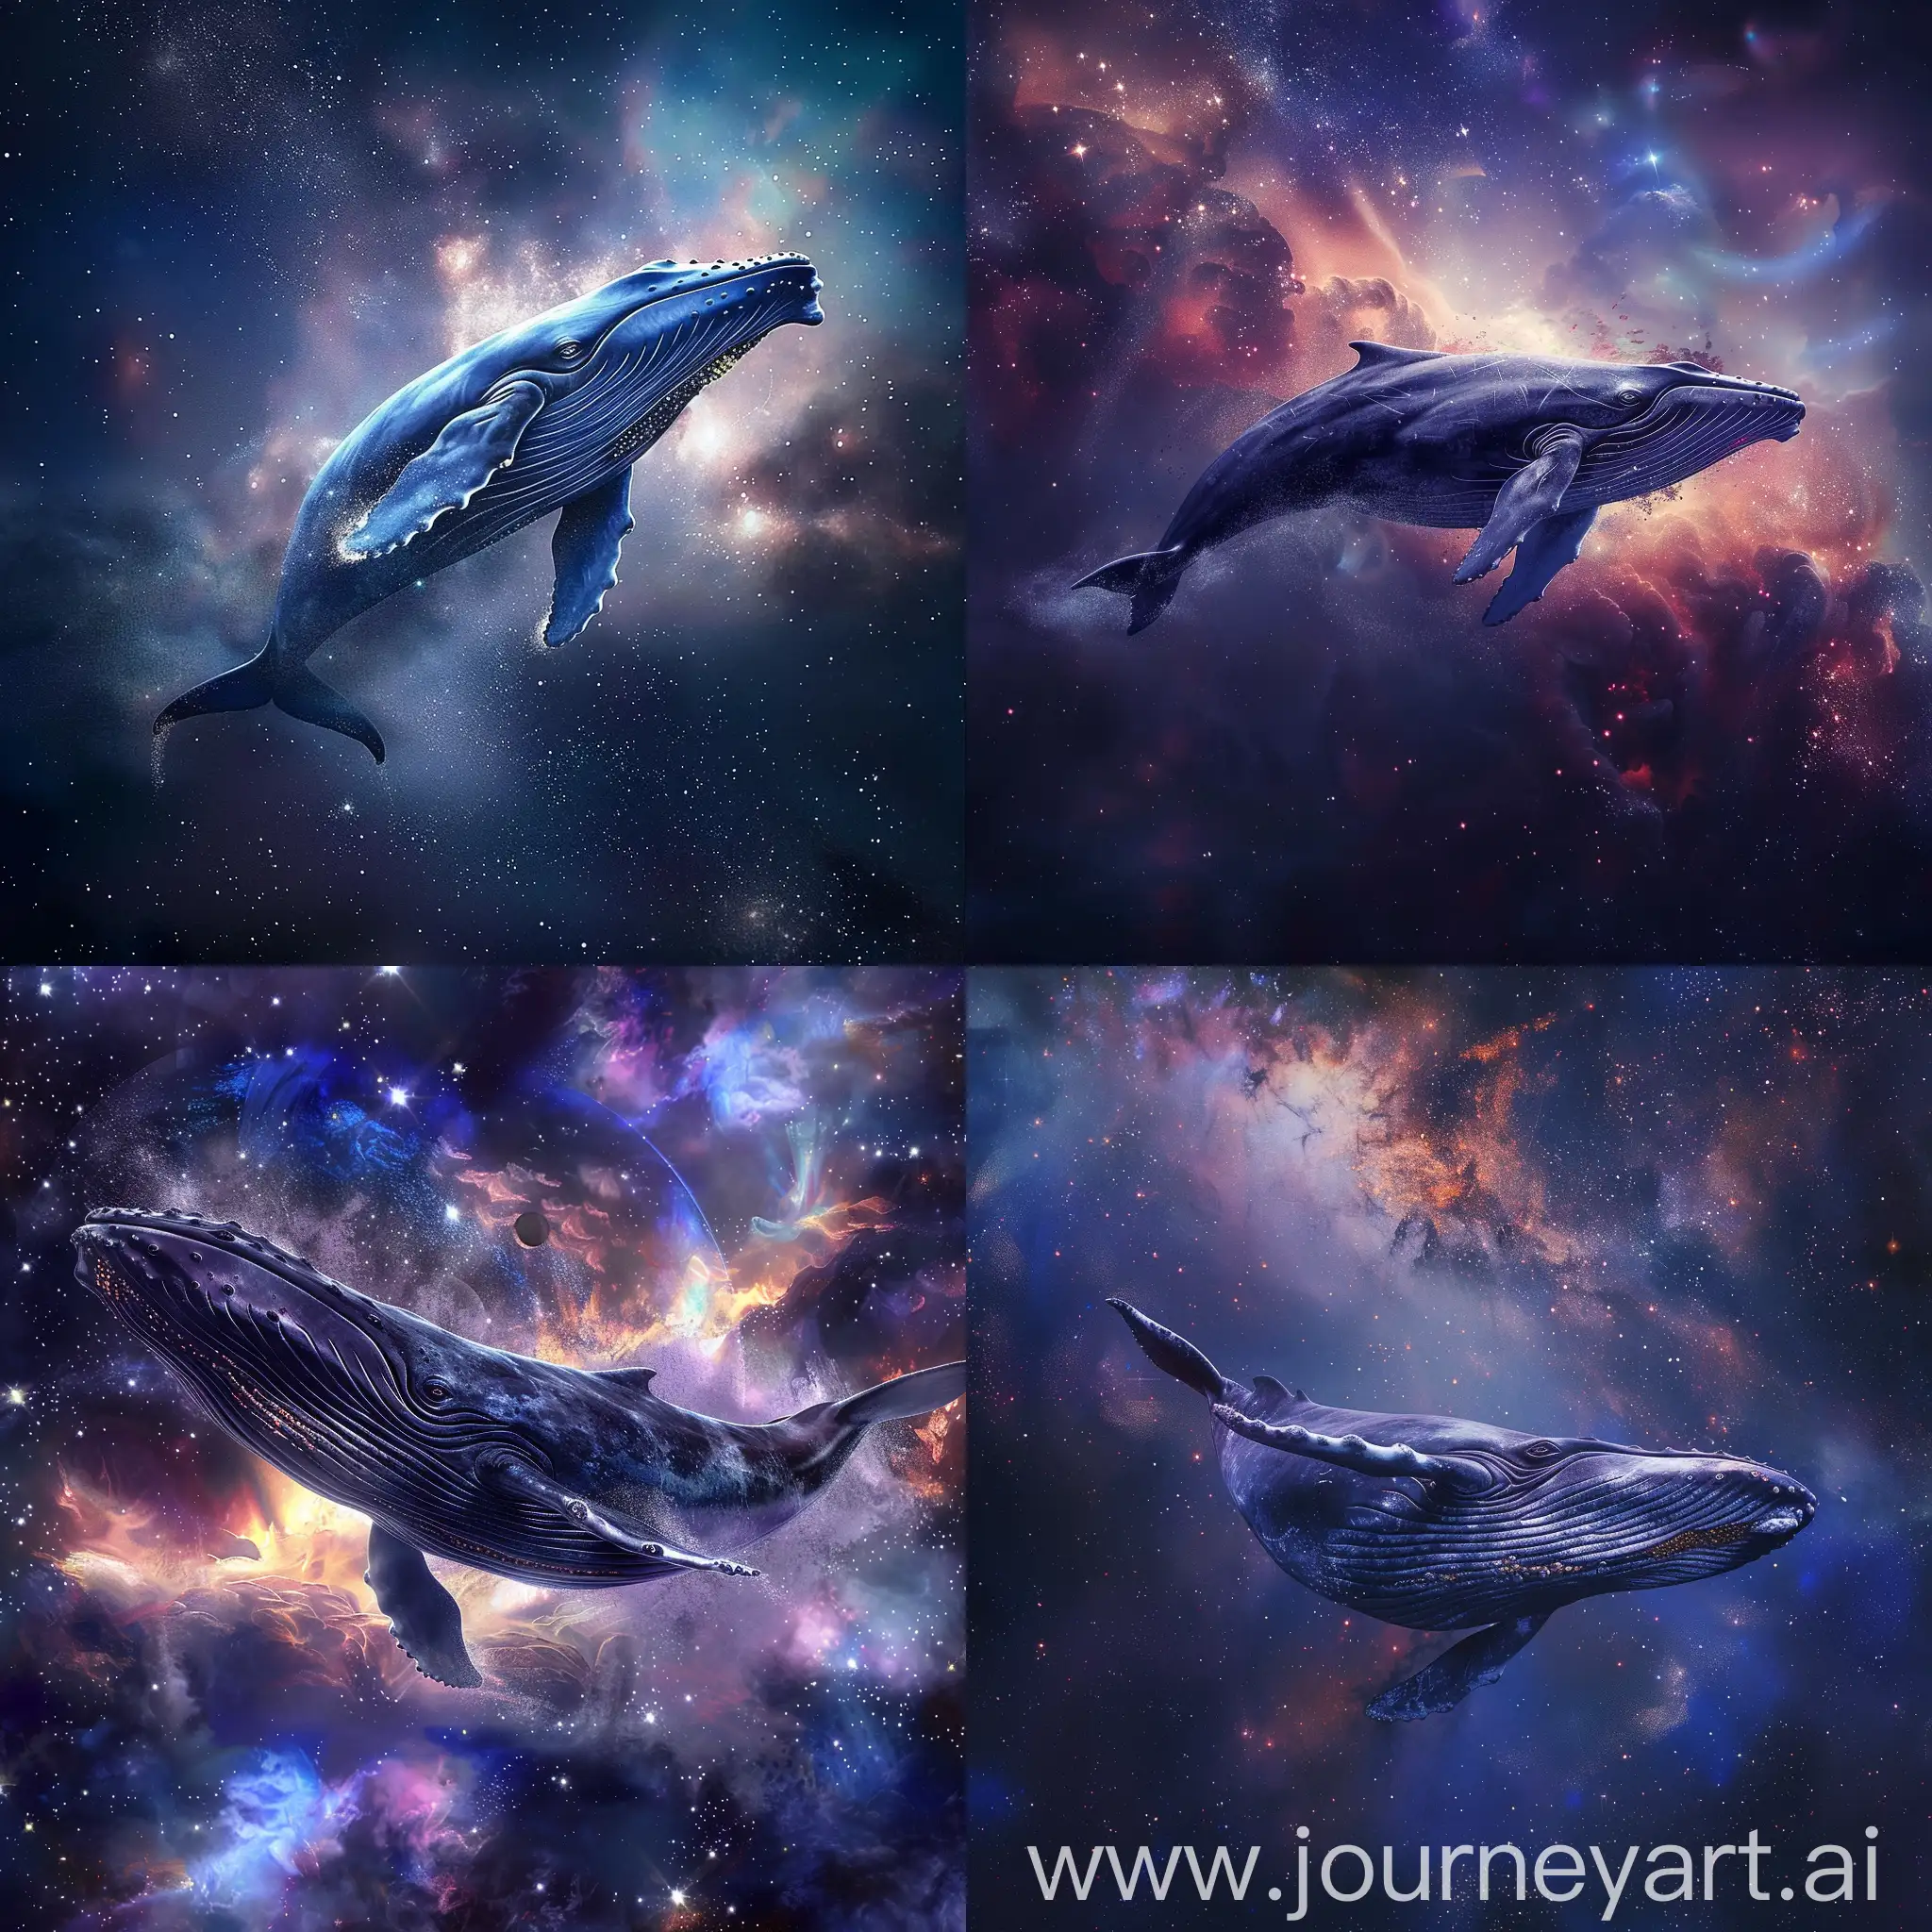 Make me background of blue whale in the space, must be spiritual, dramatic